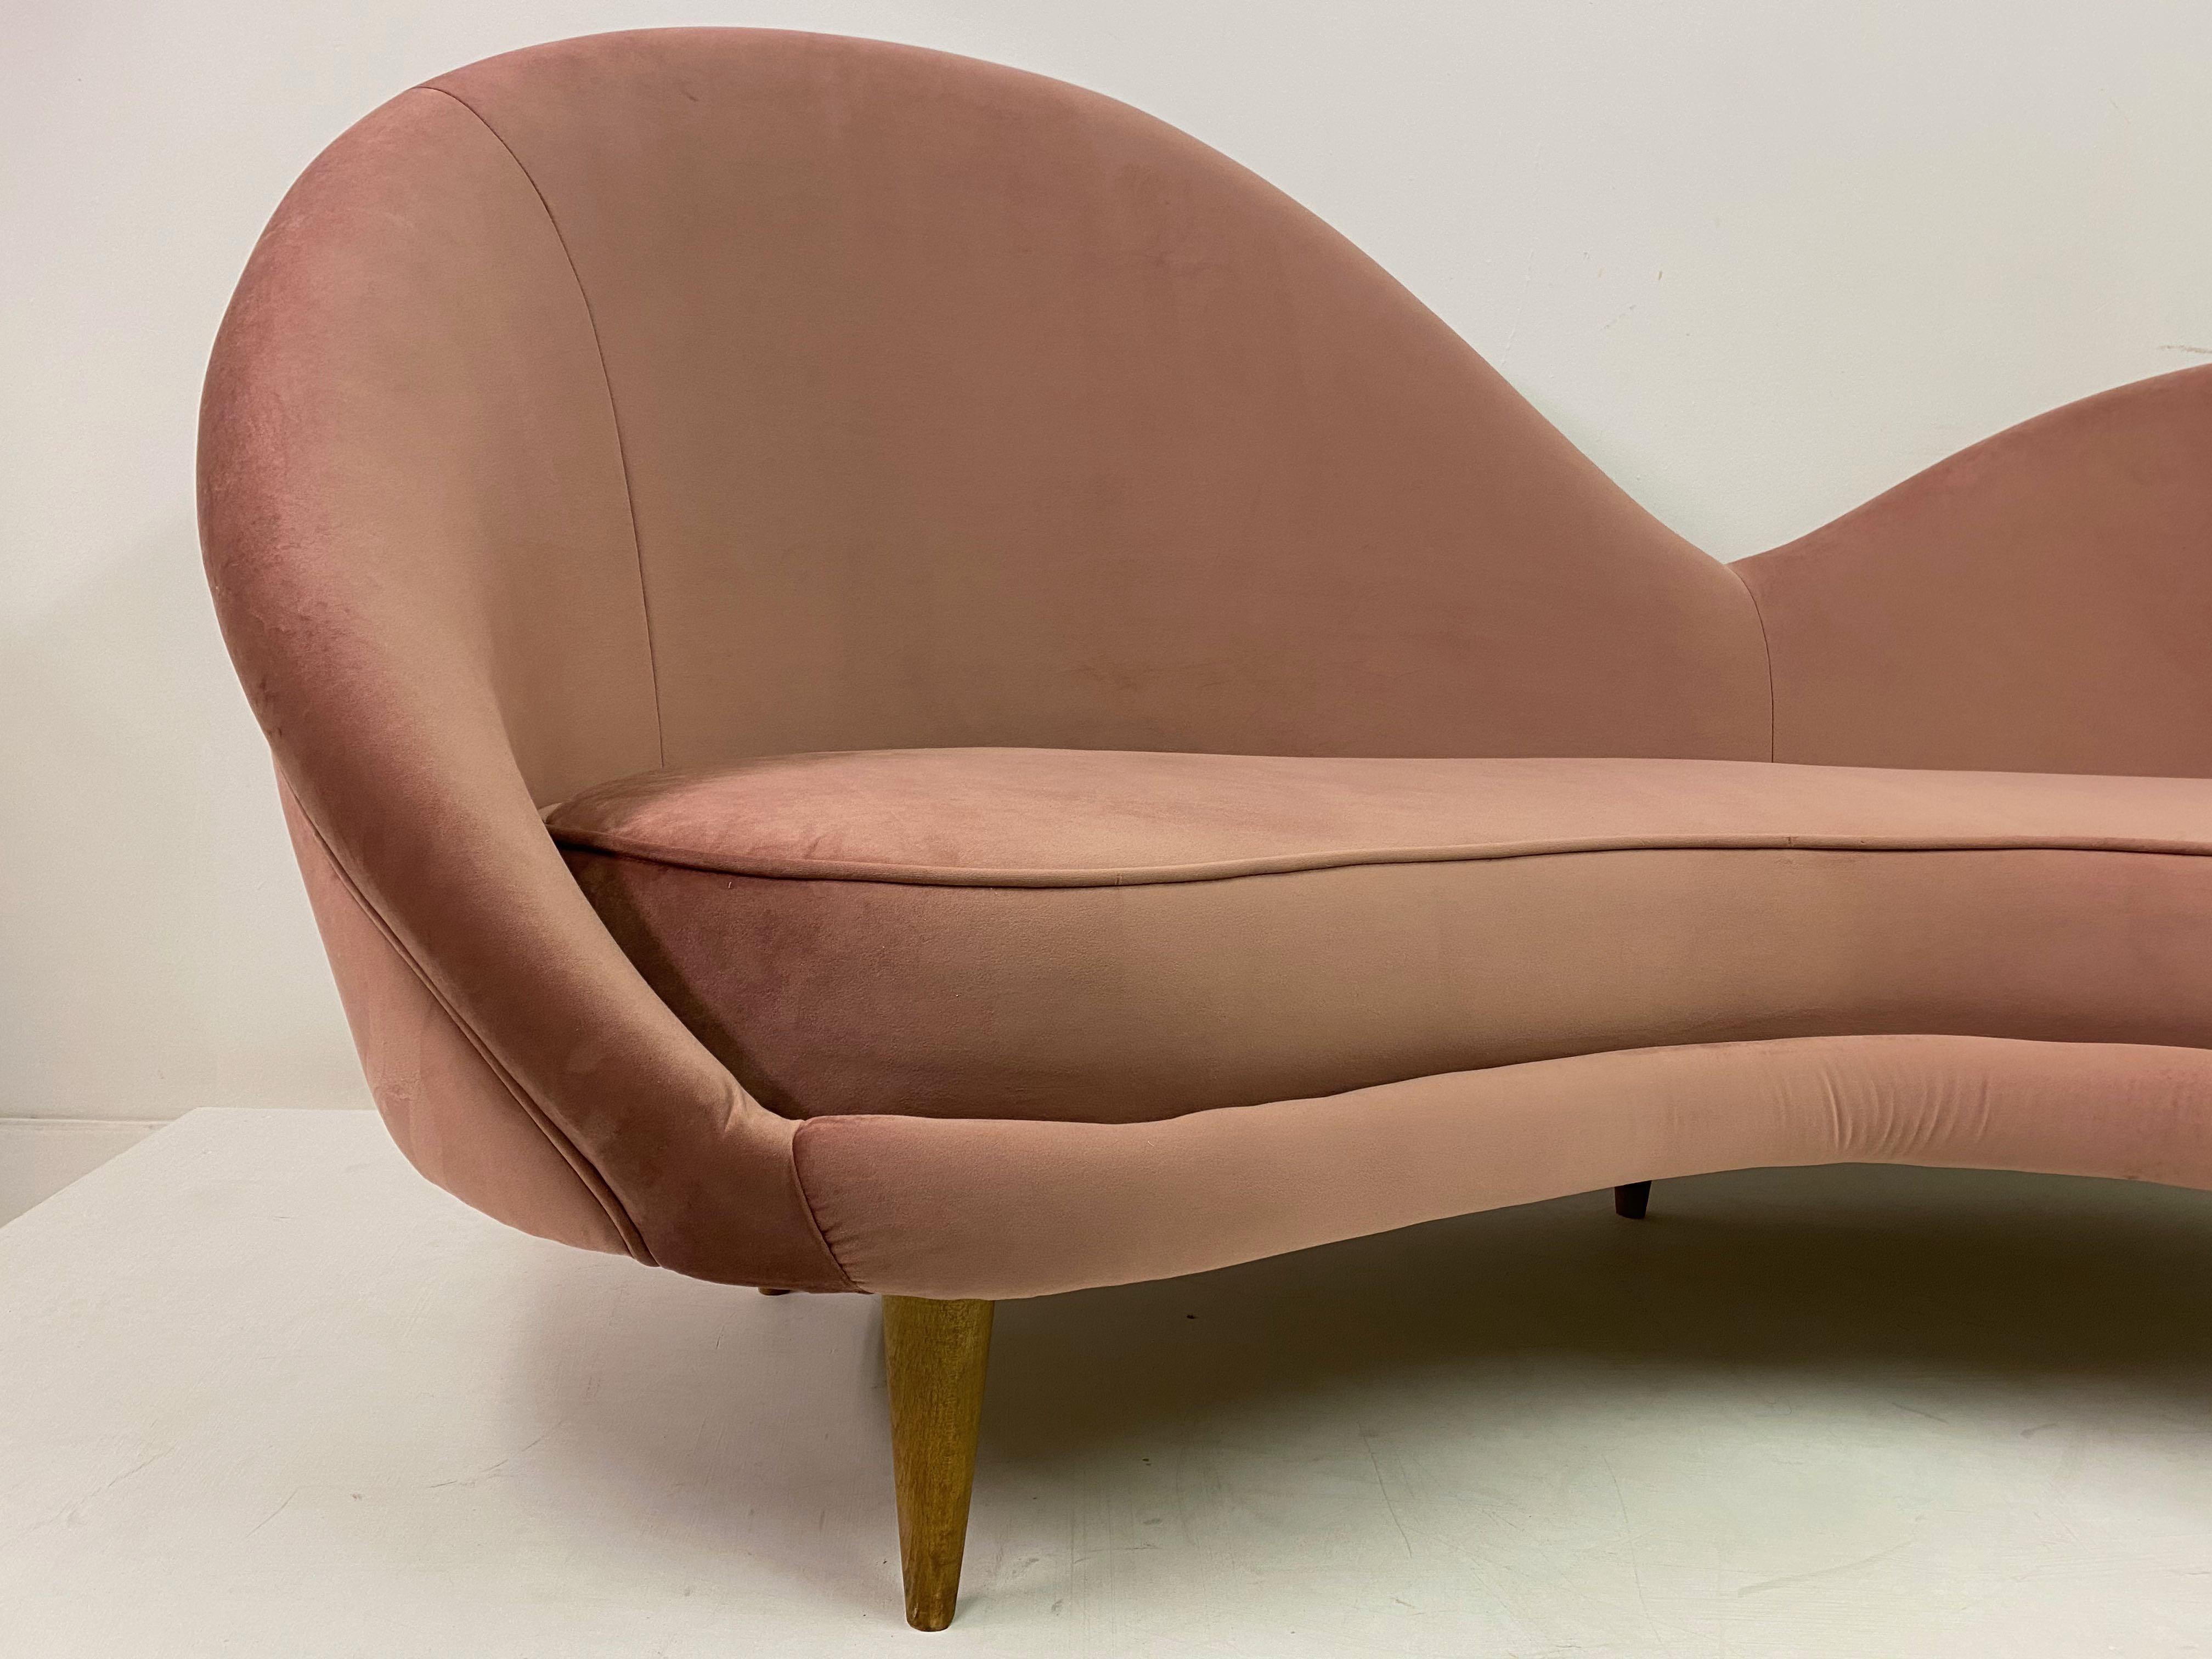 1950s Style Italian Sofa in Soft Pink Velvet In New Condition For Sale In London, London